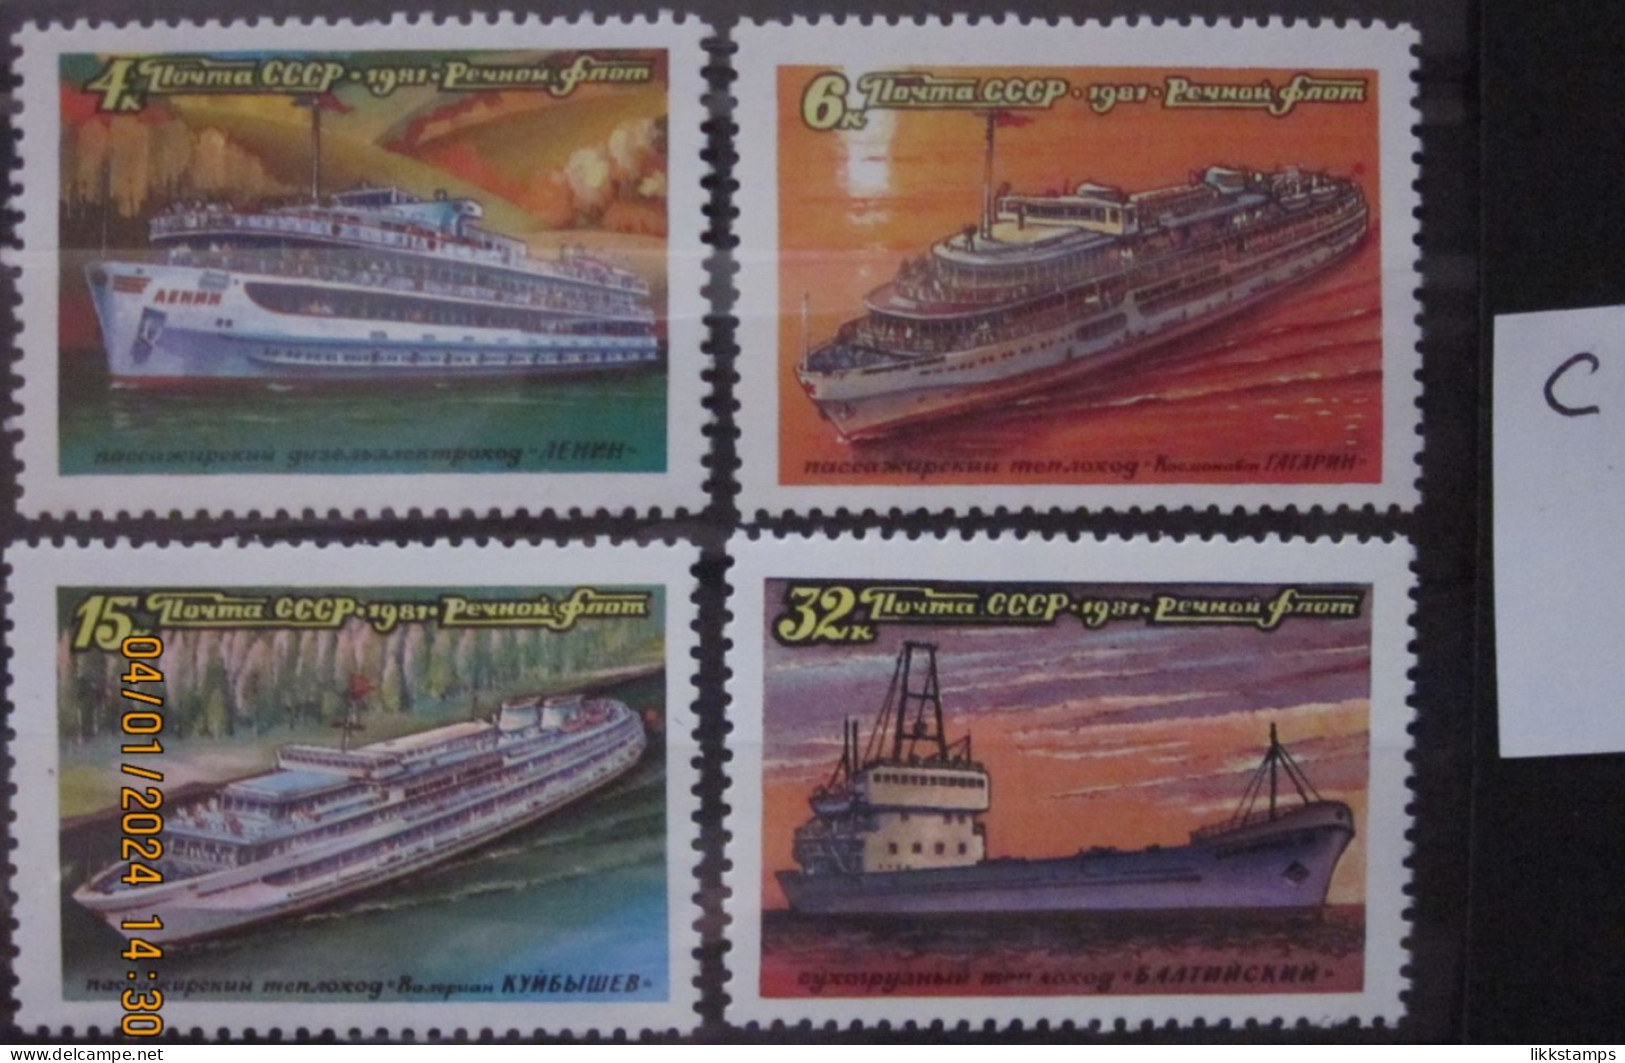 RUSSIA ~ 1981 ~ S.G. NUMBERS 5143 - 5146, ~ 'LOT C' ~ RIVER SHIPS. ~ MNH #03621 - Neufs